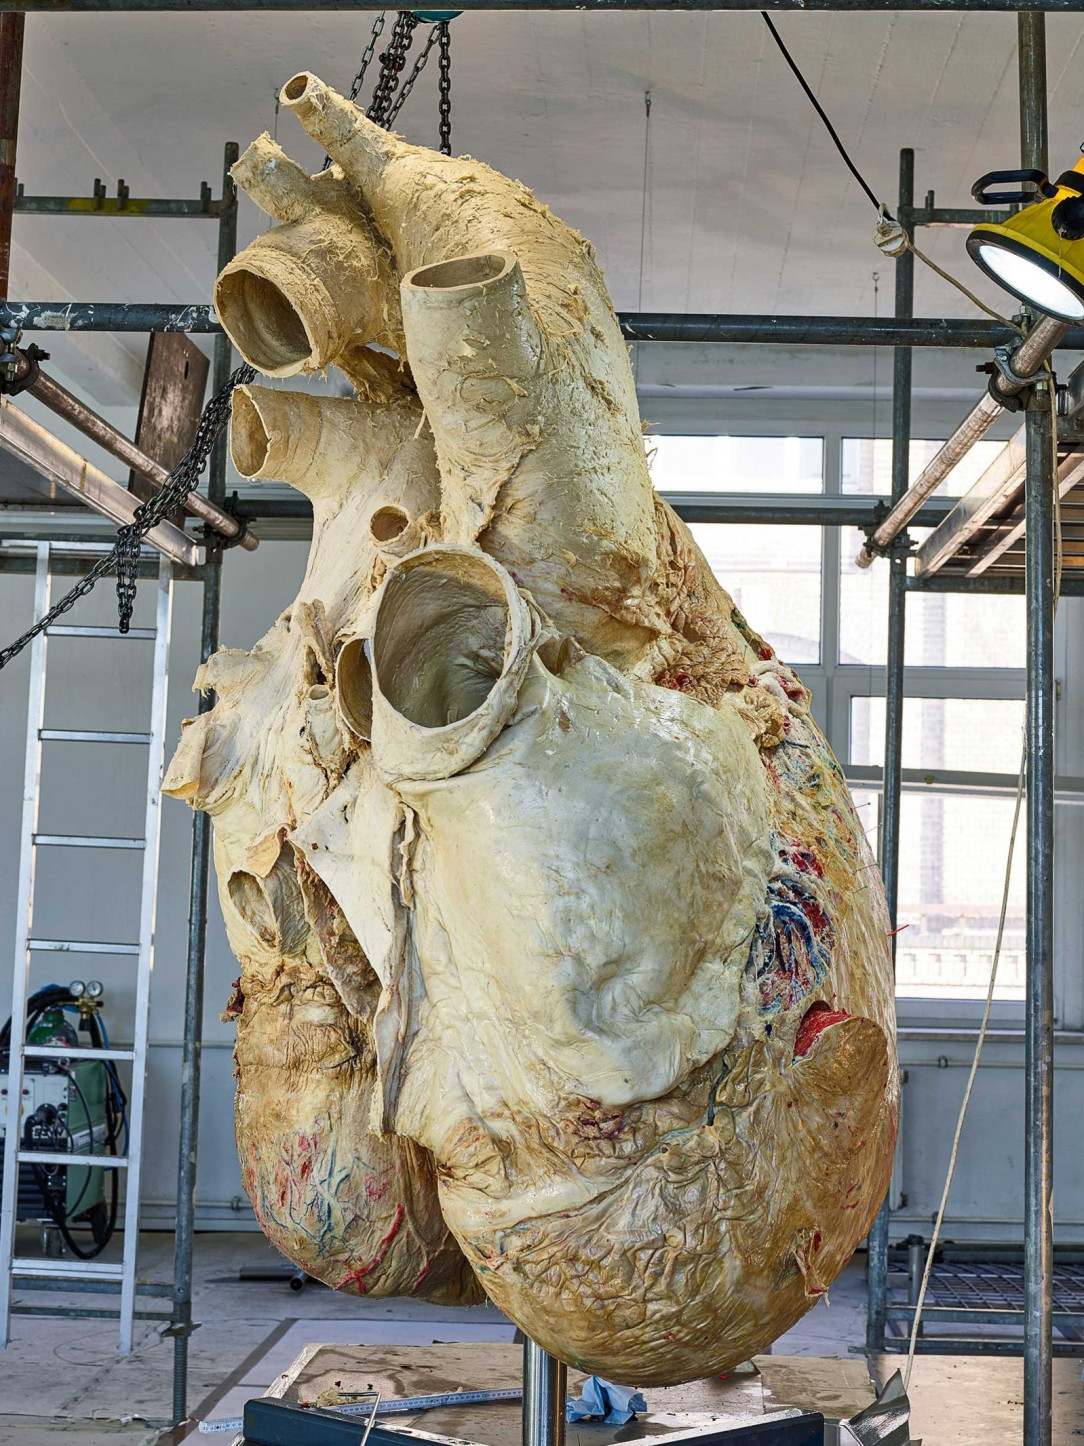 The heart of a blue whale weighs 440 lbs